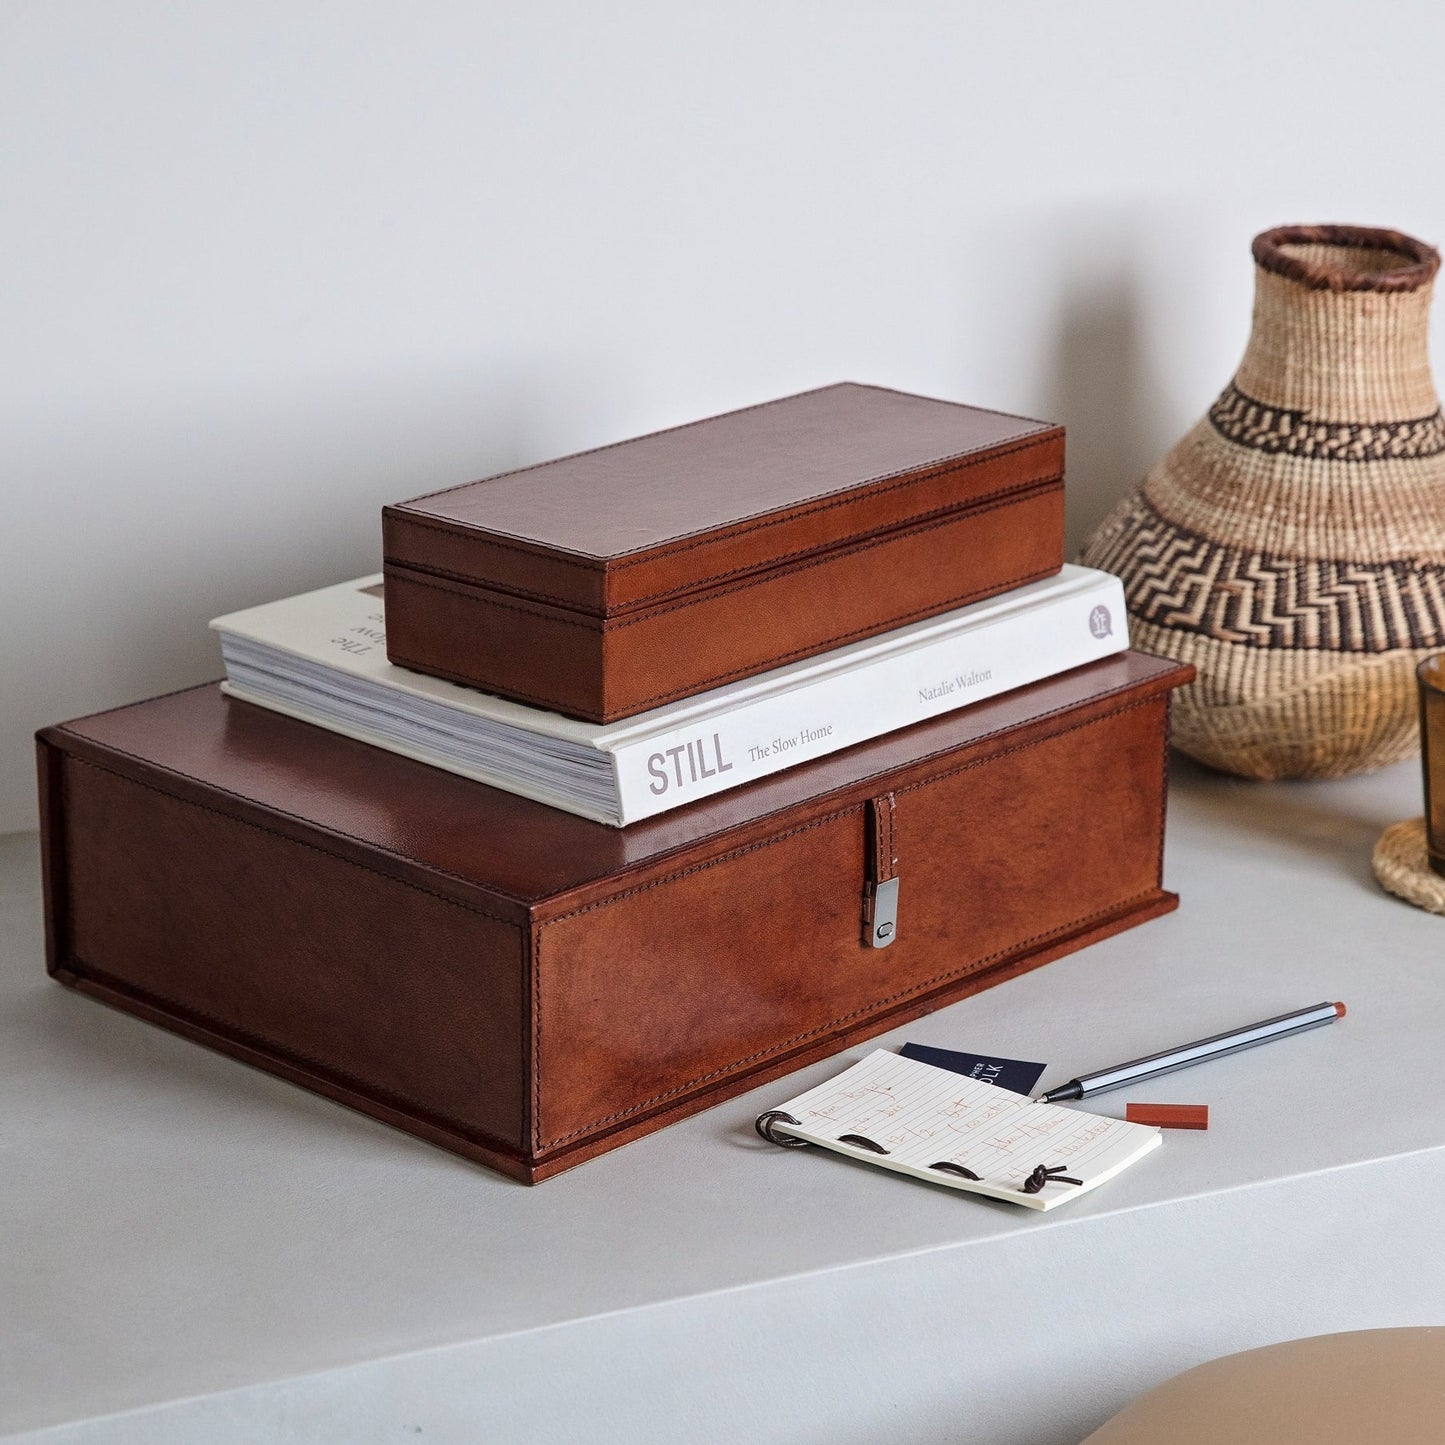 A stylish gift for a new home or 3rd wedding anniversary, this duo of leather boxes includes a box file and small rectangular desk tidy box, perfect for pens, glasses and accessories. Personalise to create a thoughtful gift for him or her.